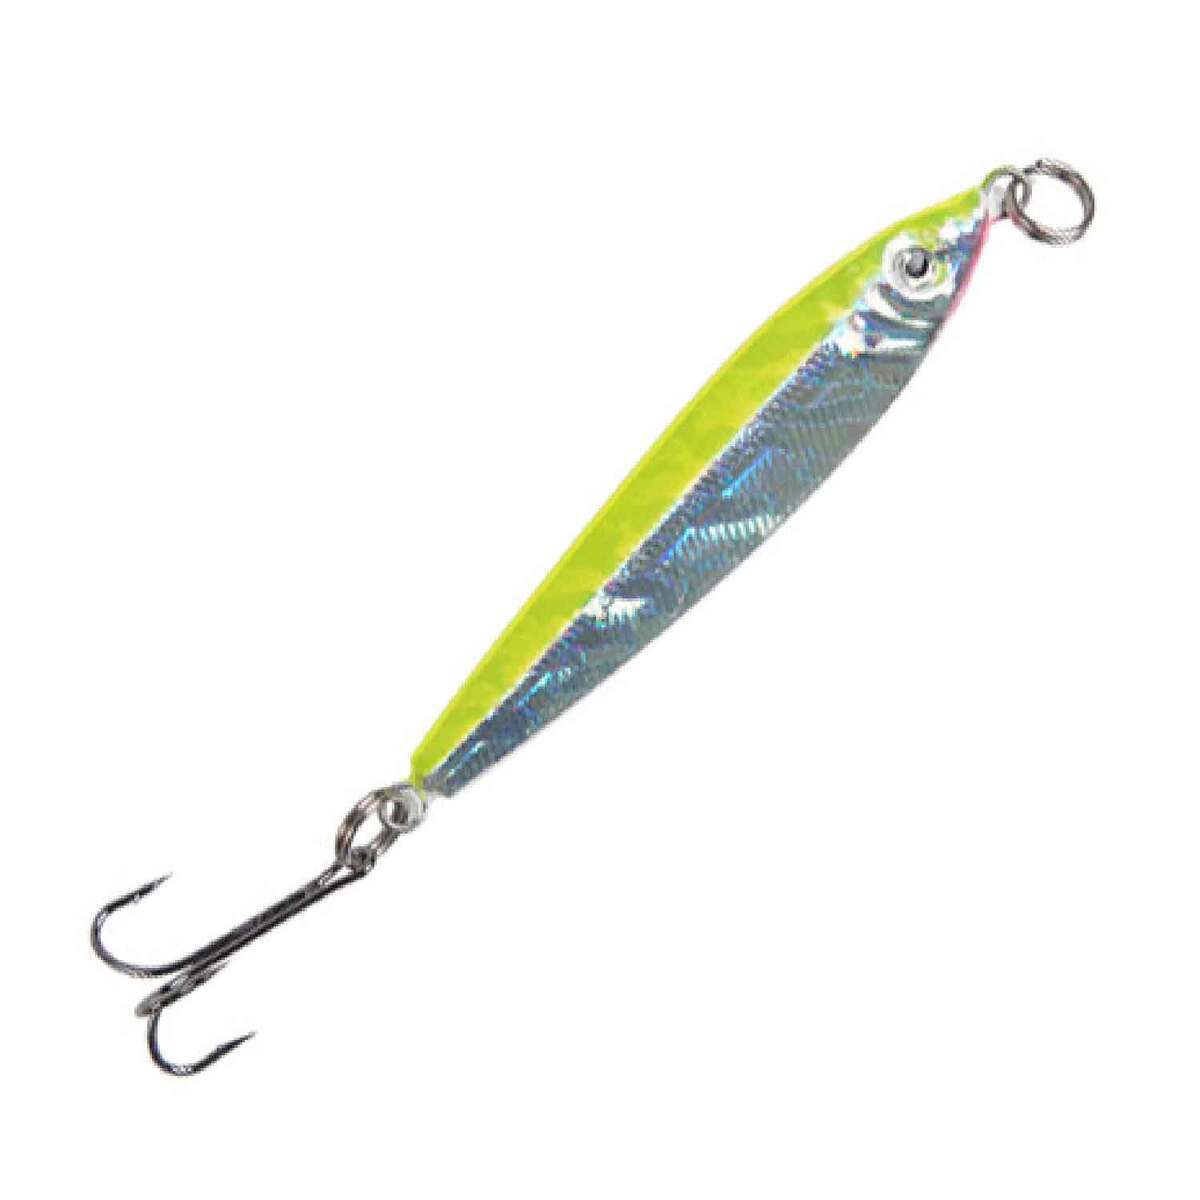 Rainbow Double X Tackle Pot-o-gold Bass & Trout Spoon Fishing Lure, Brown  Trout, 1/2 oz.